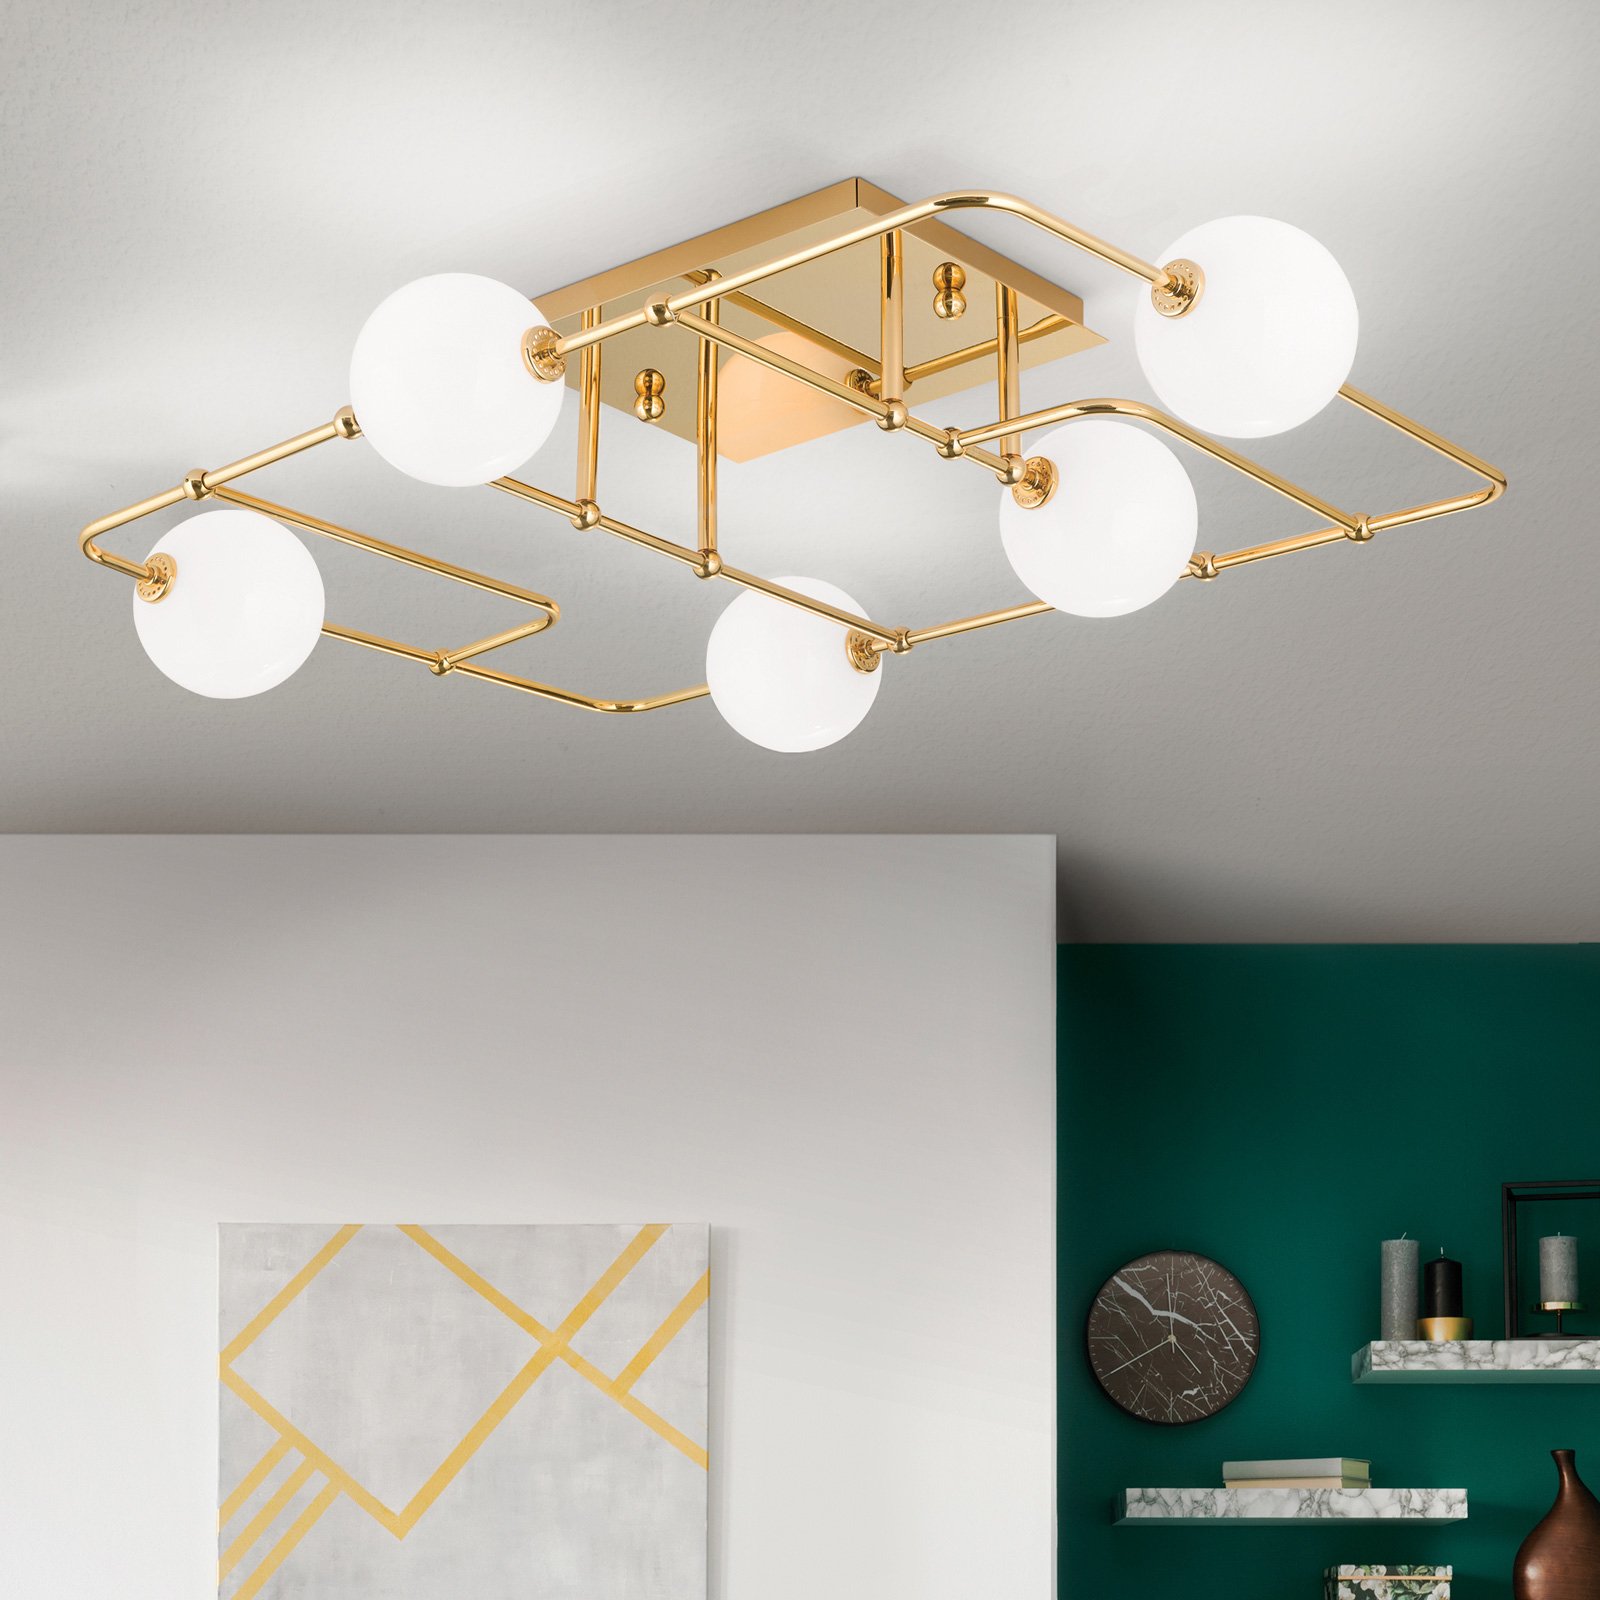 Pipes LED ceiling light in gold with glass balls